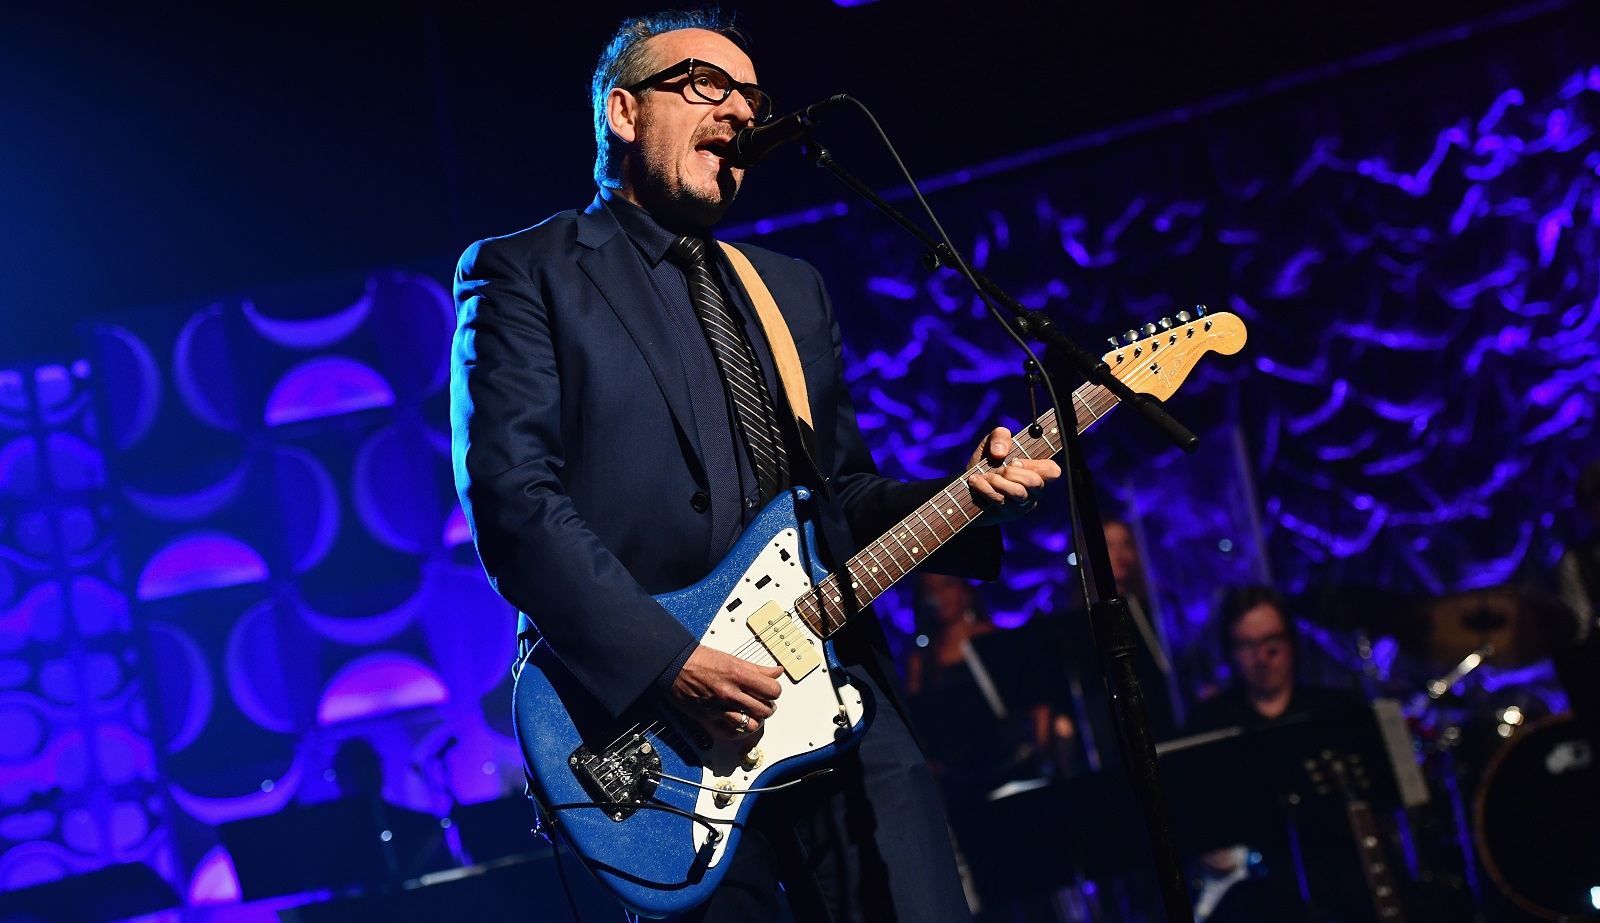 NEW YORK, NY - JUNE 09: Elvis Costello performs onstage during the Songwriters Hall Of Fame 47th Annual Induction And Awards at Marriott Marquis Hotel on June 9, 2016 in New York City. (Photo by Larry Busacca/Getty Images for Songwriters Hall Of Fame)